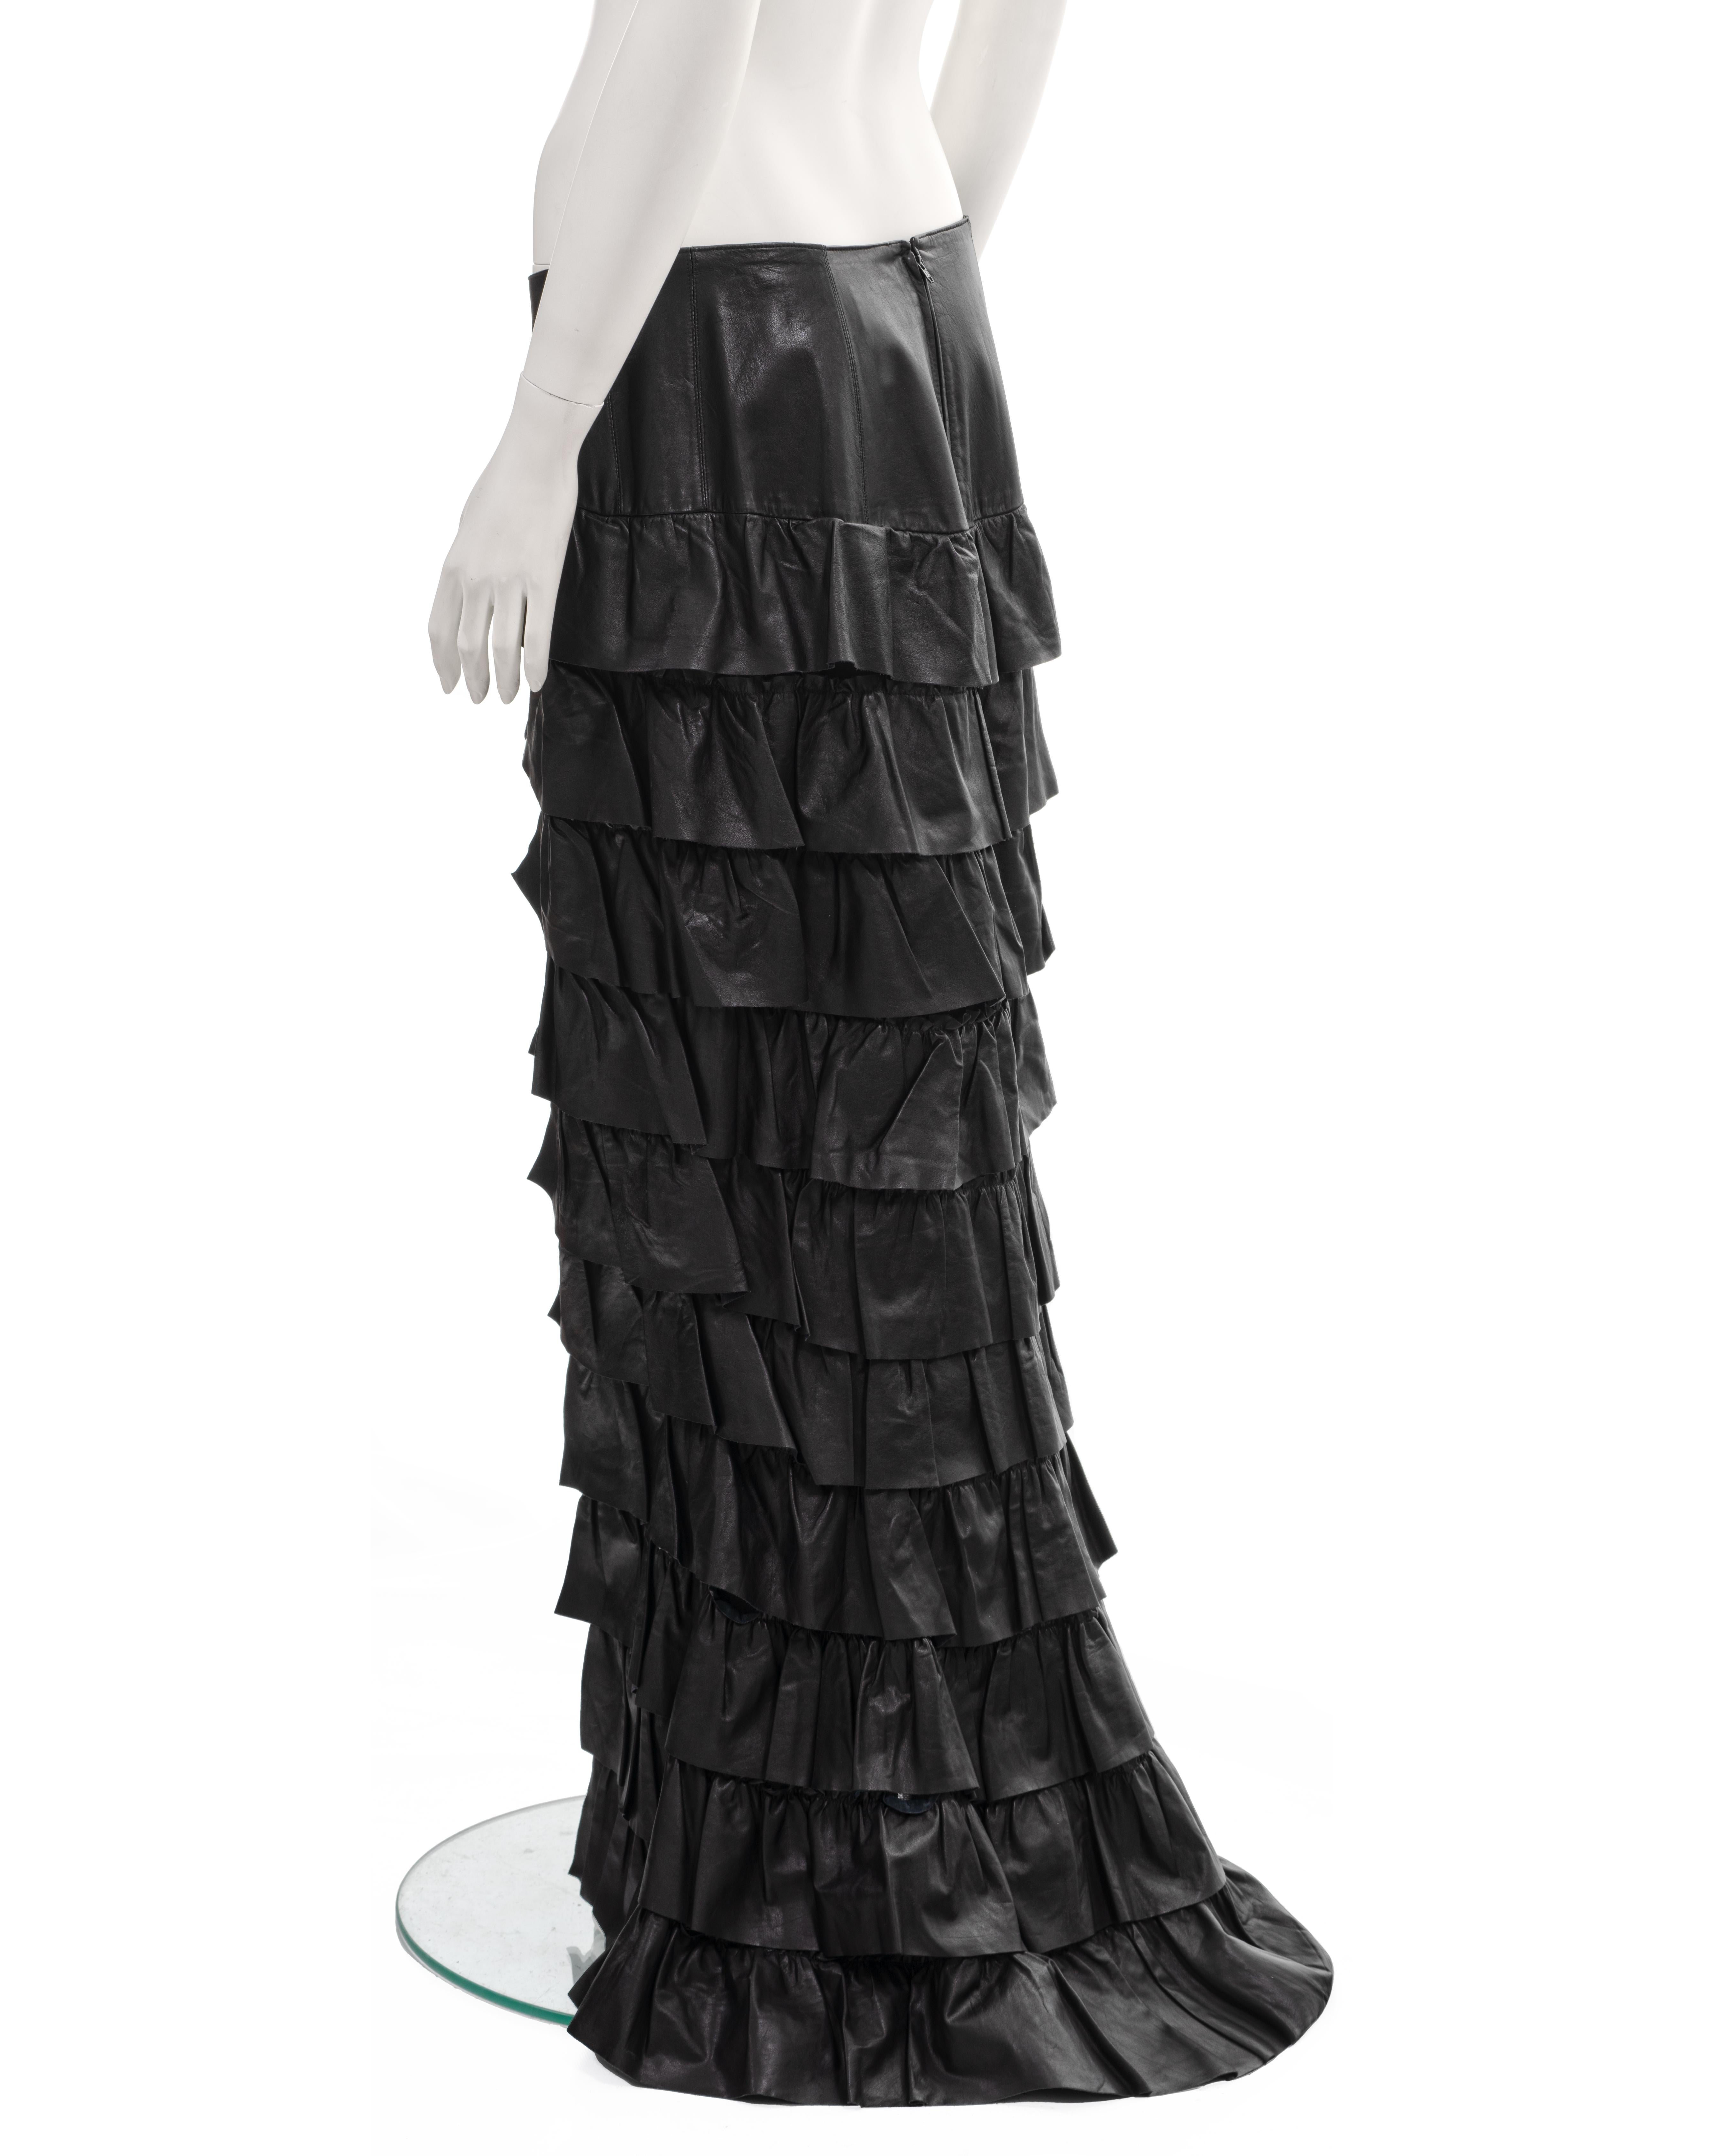 Chanel by Karl Lagerfeld black leather tiered ruffled maxi skirt, fw 2001 6